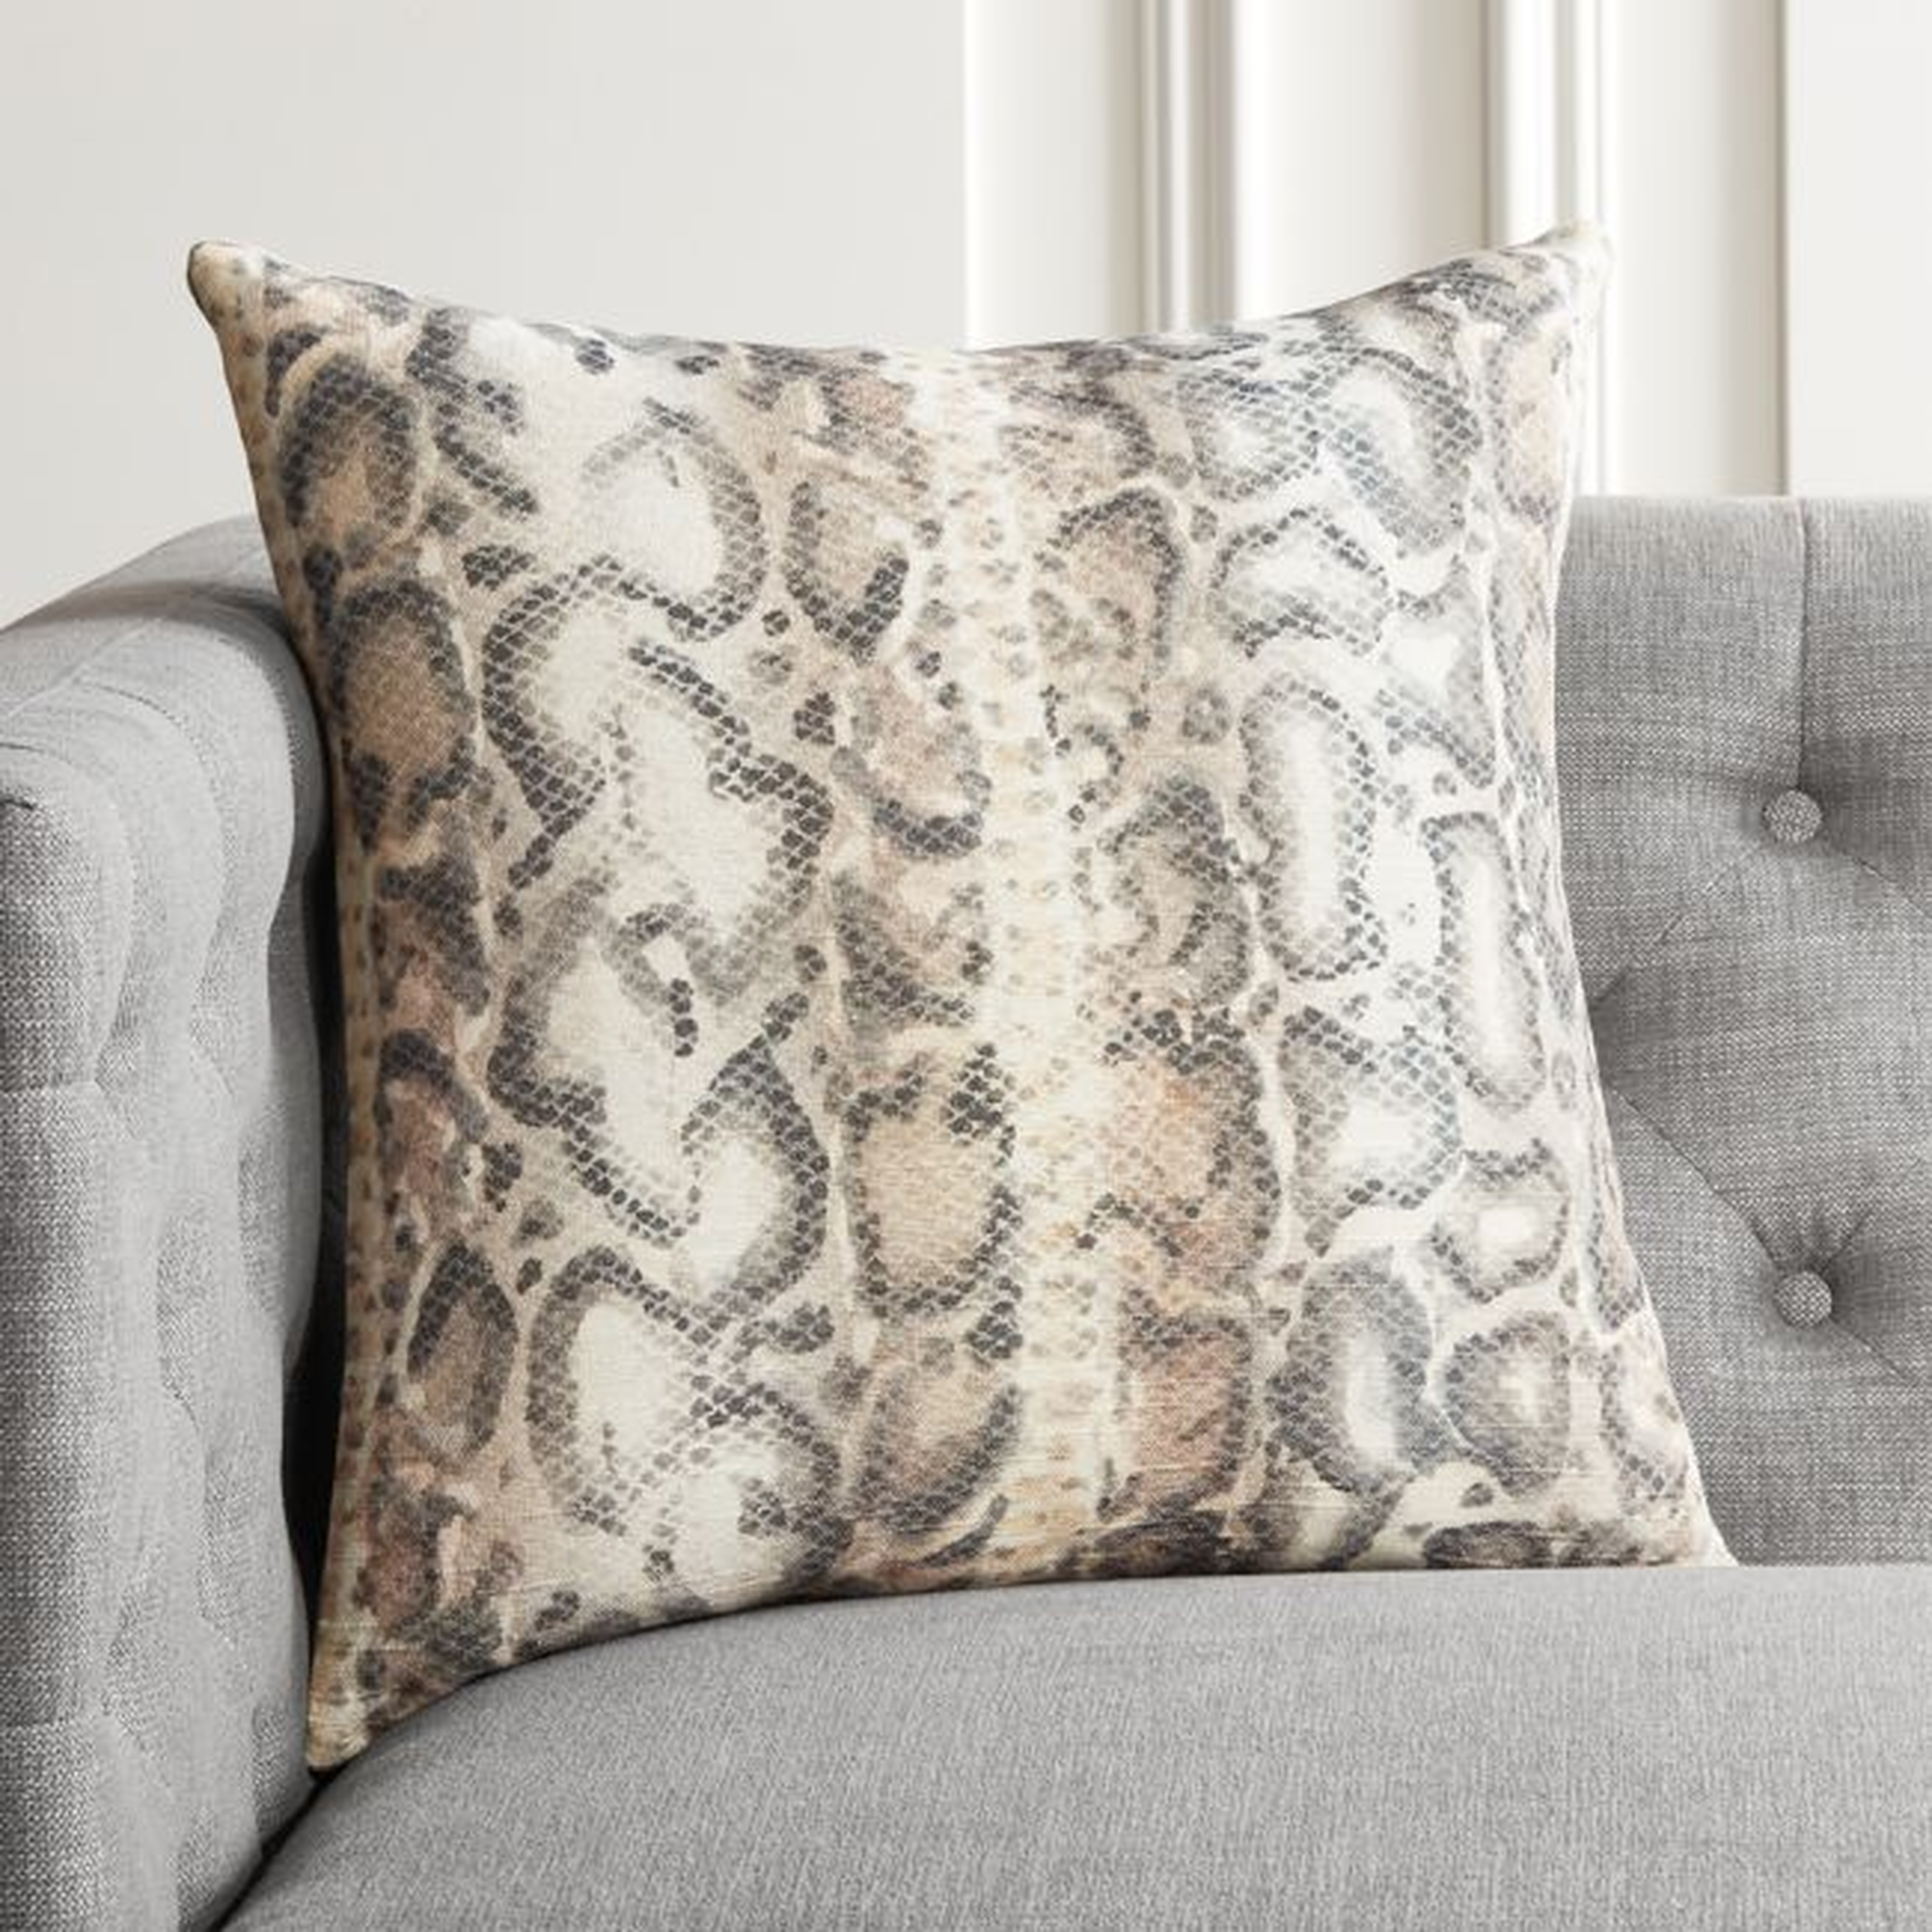 Viper Snakeskin Throw Pillow with Feather-Down Insert 18" - CB2